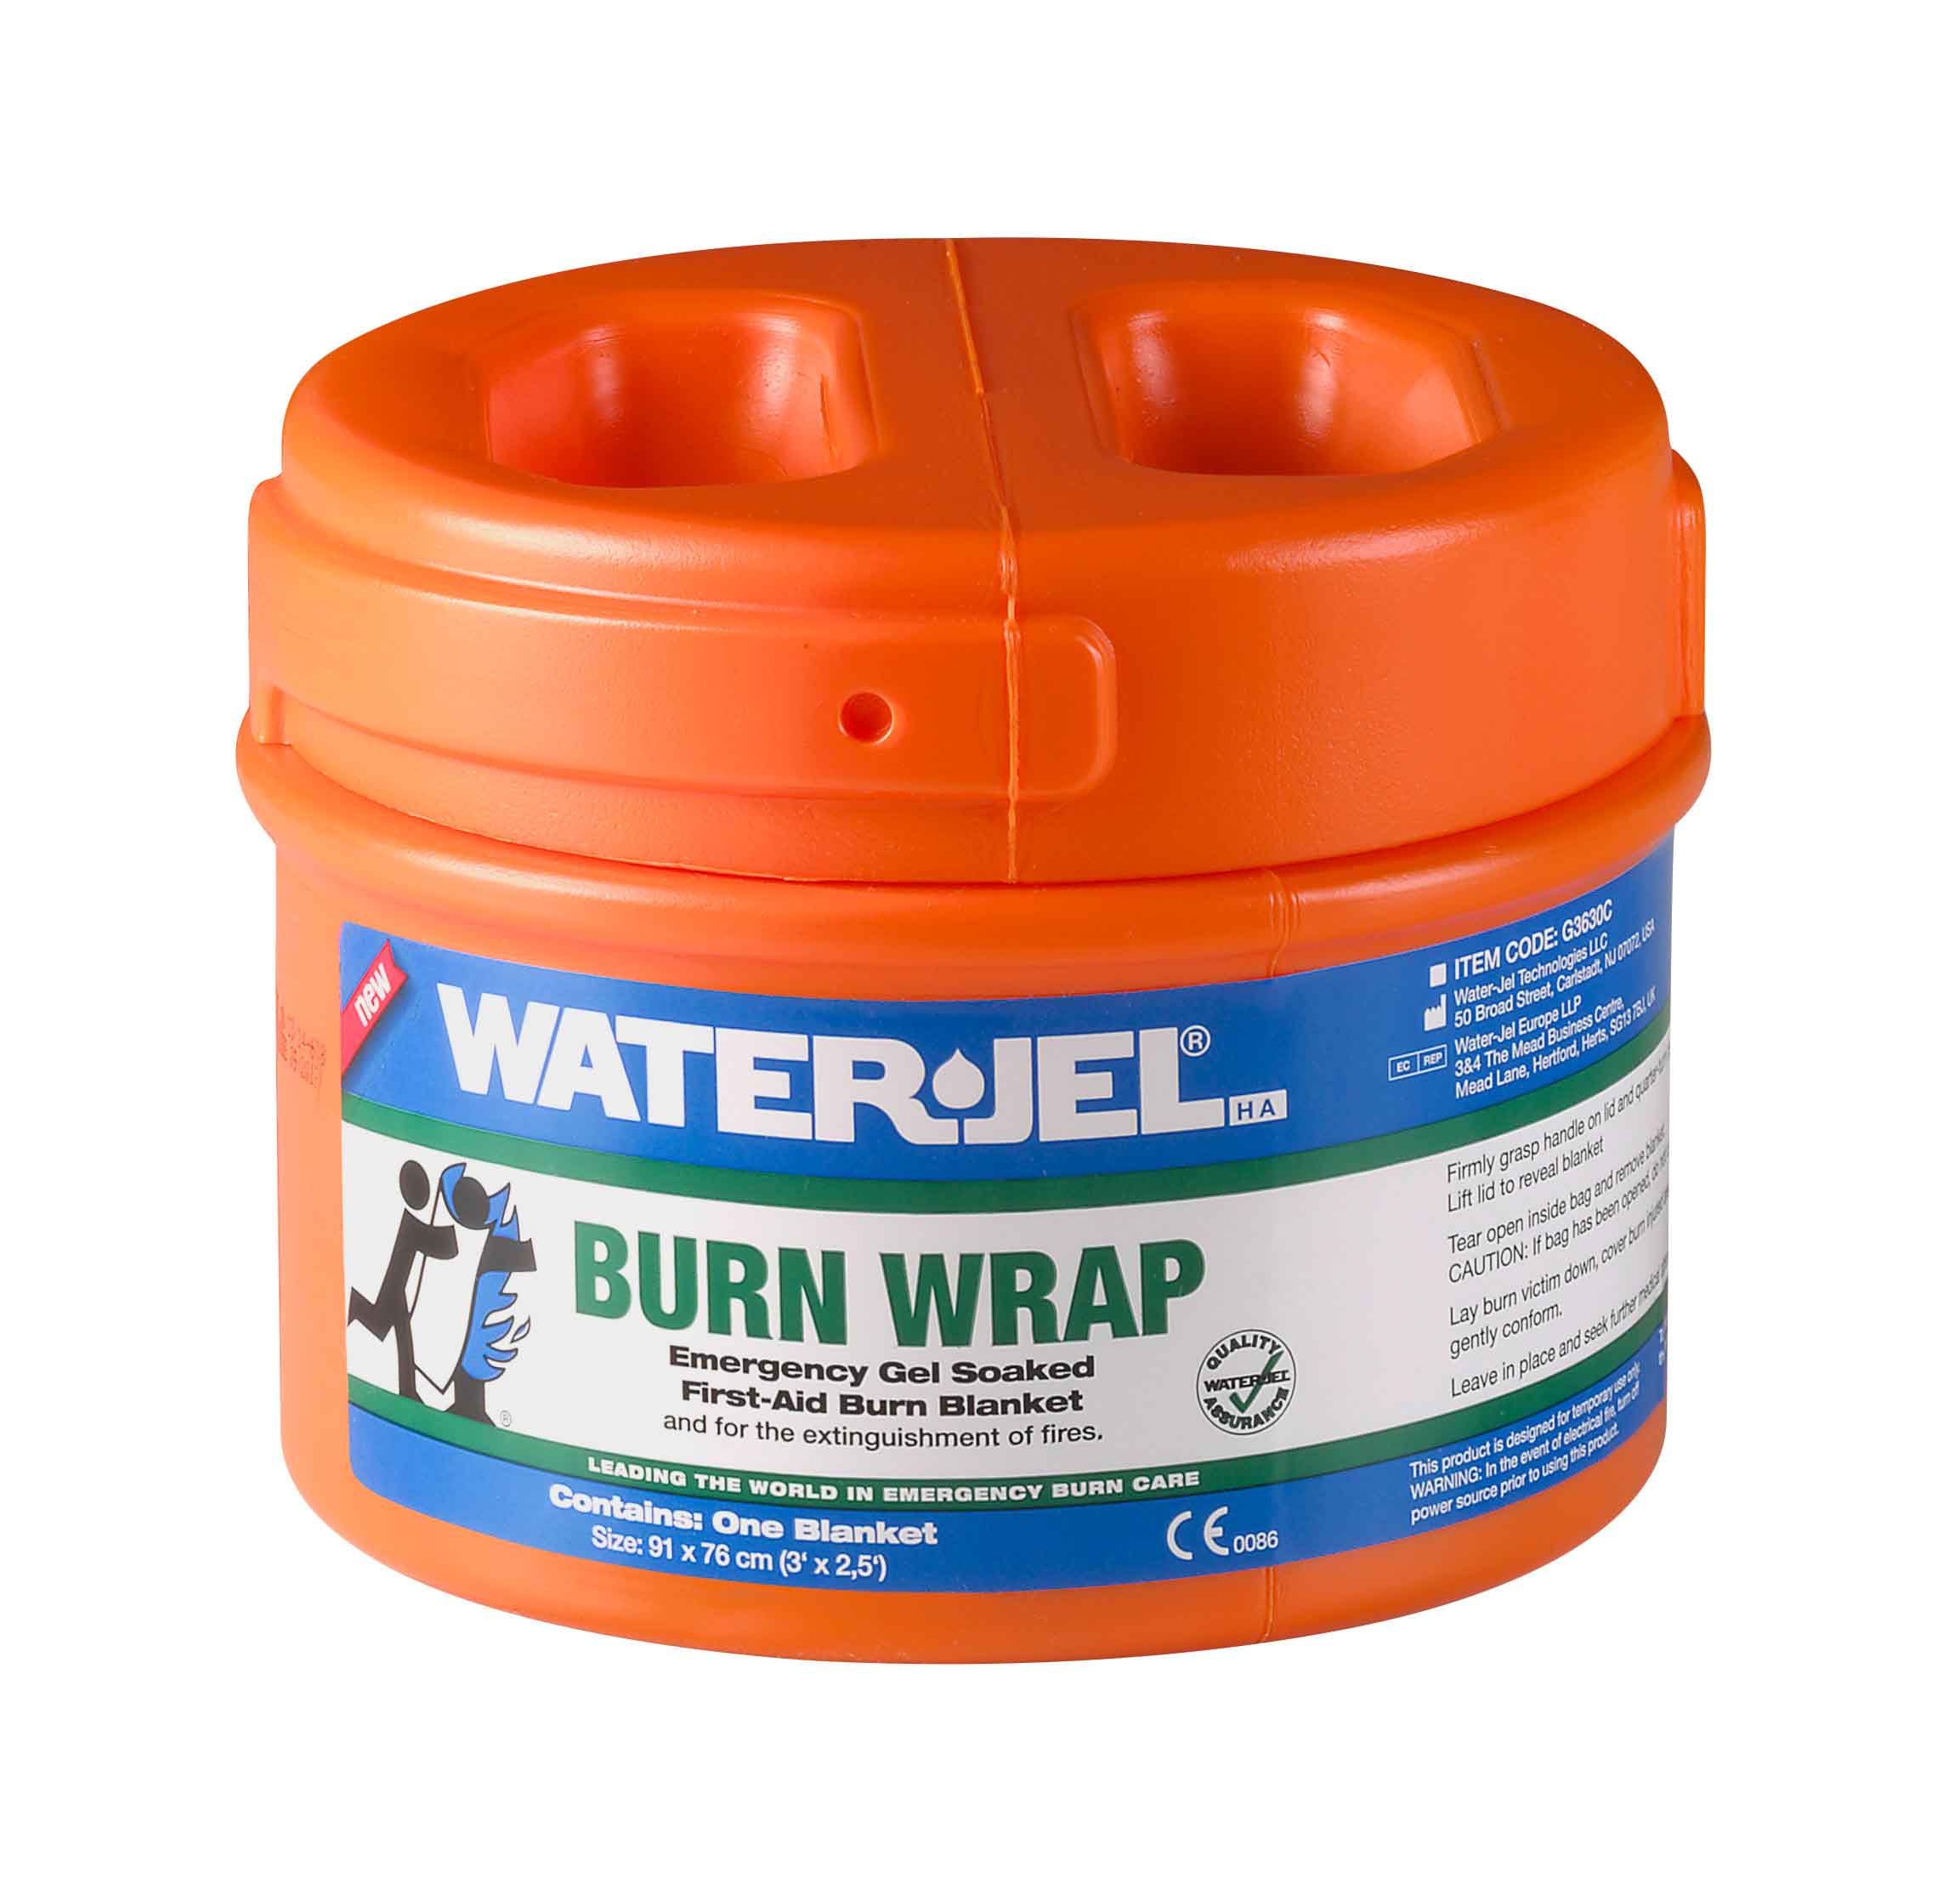 Water-Jel Burn Wrap 91x76 cm (Canister)